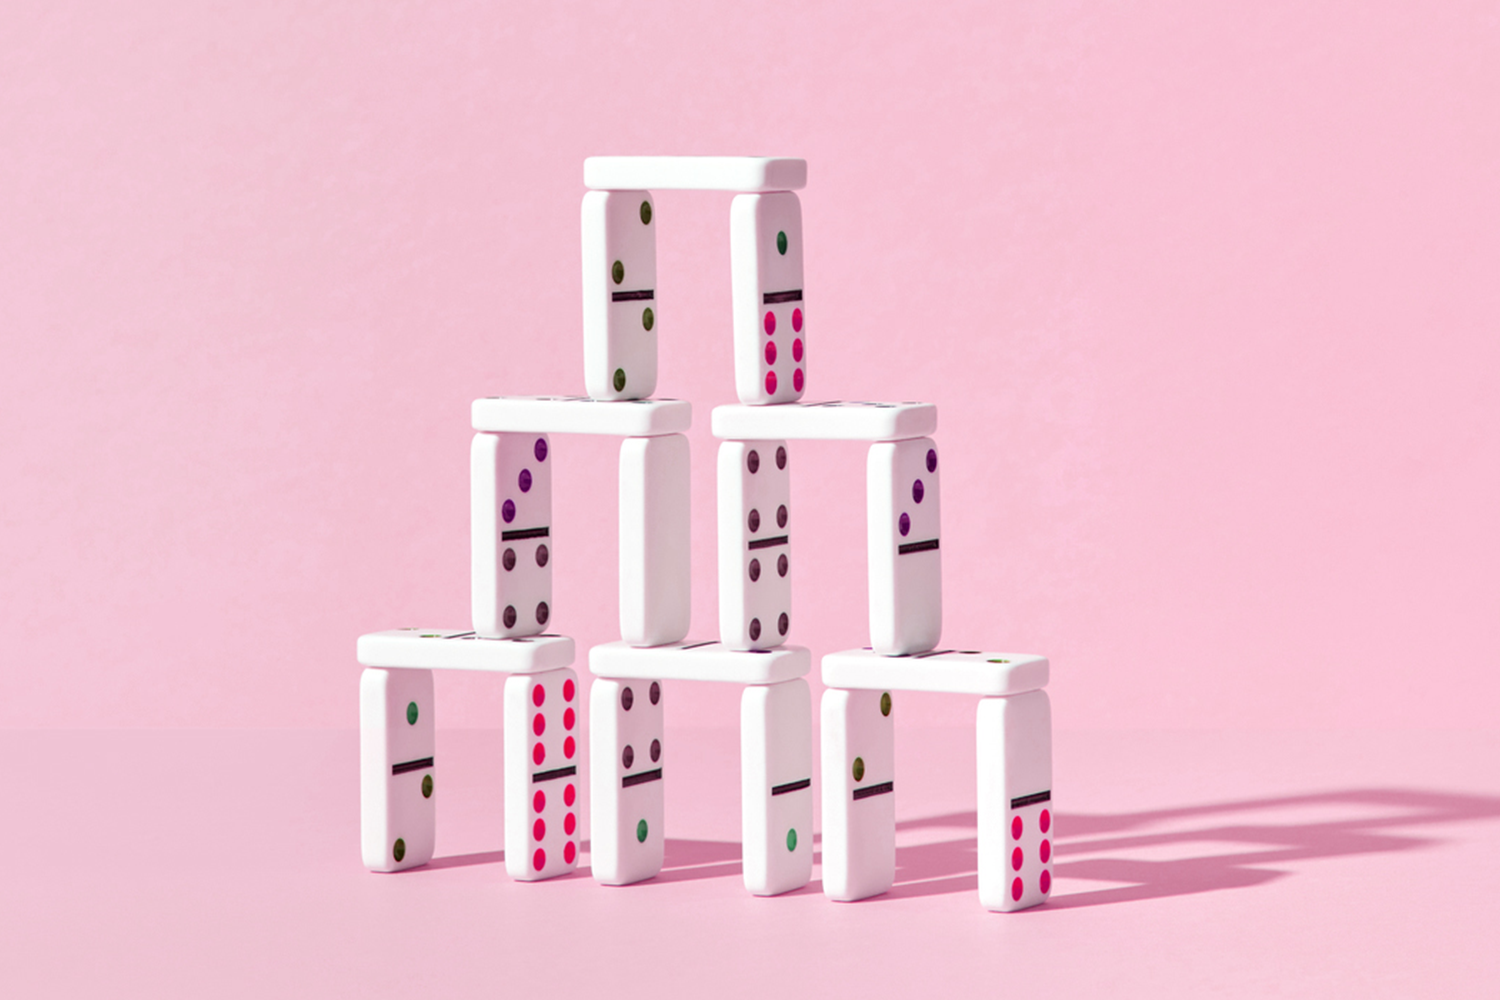 a photo of stacked dominos on a pink background